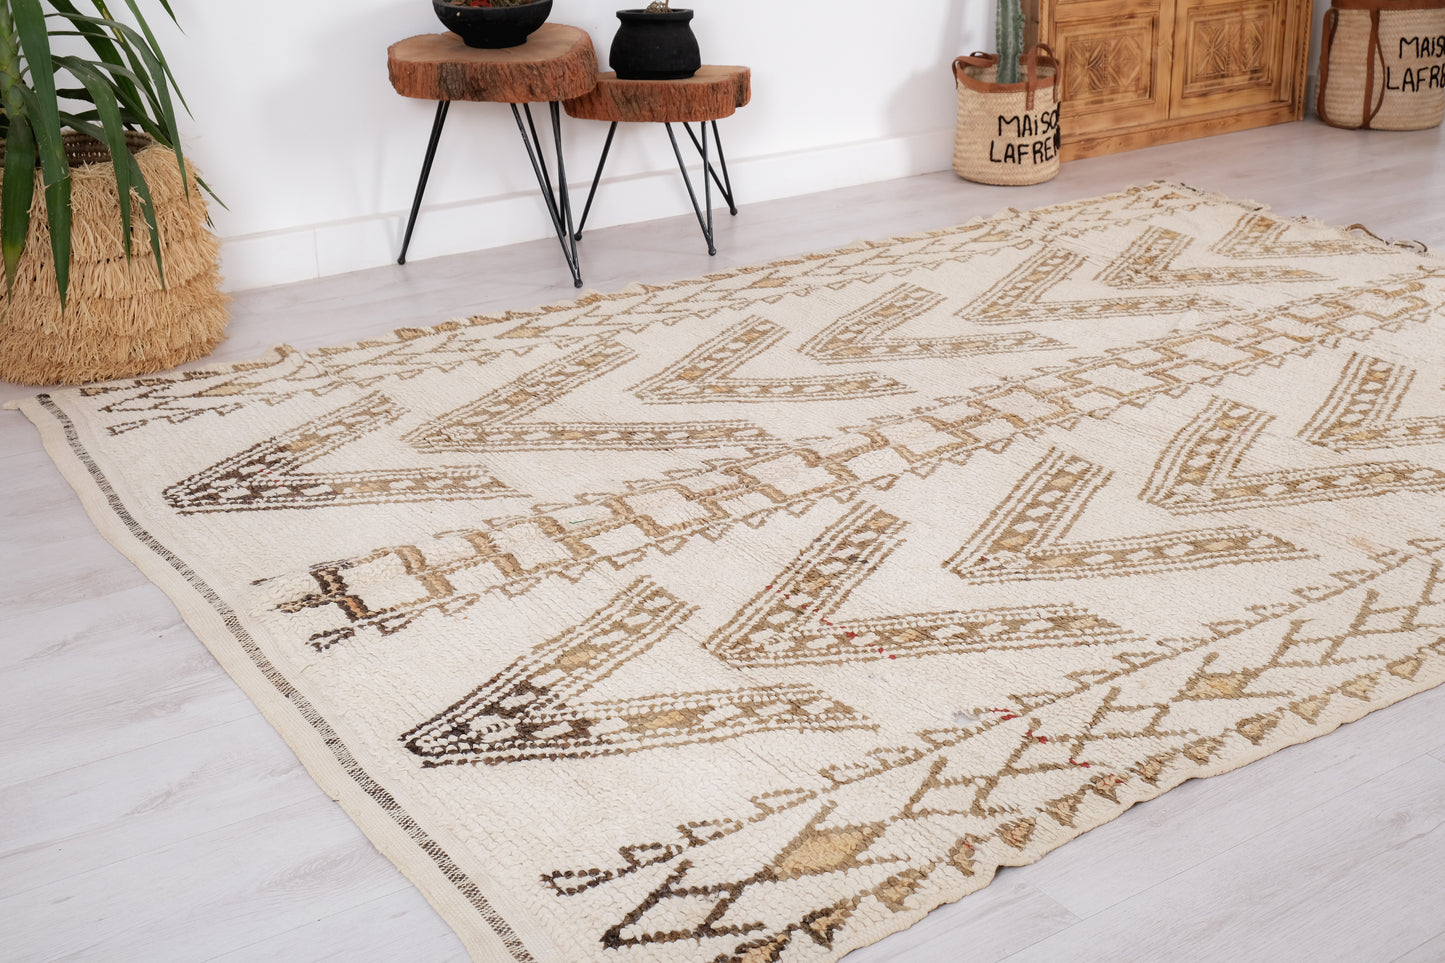 Beni Ourain Rug 6x9 ft – Ref. 1687